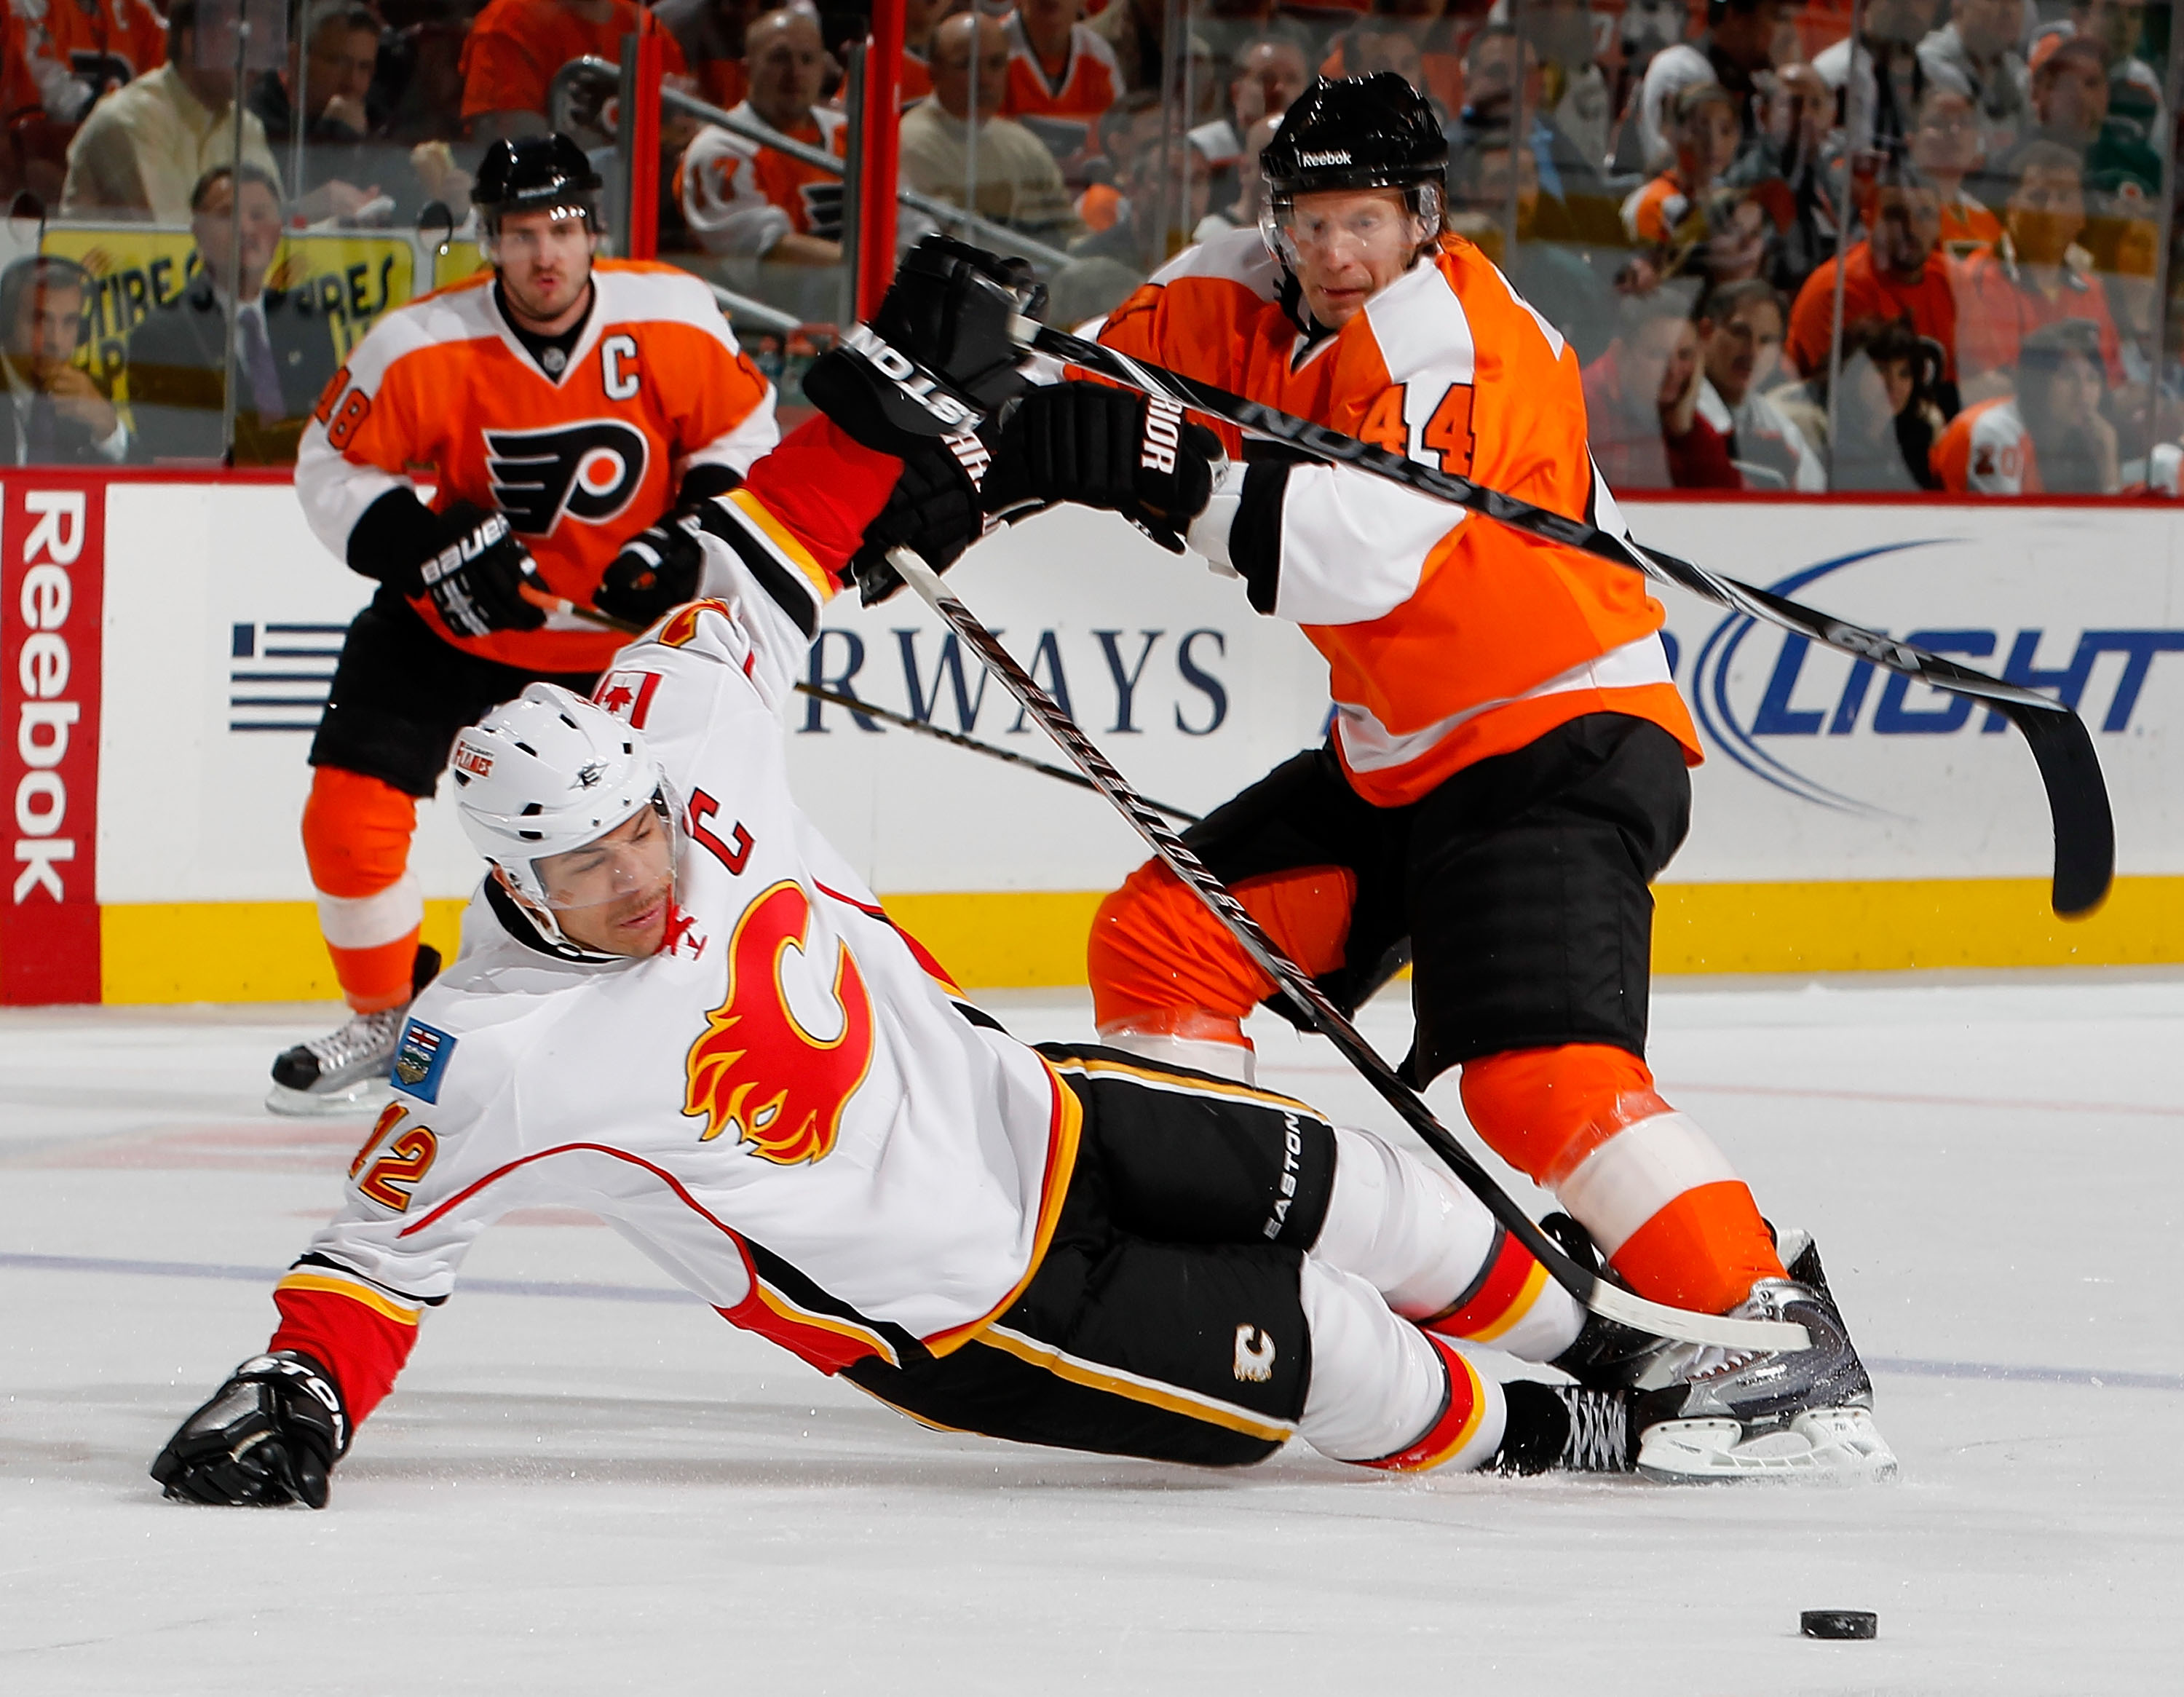 PHILADELPHIA - NOVEMBER 26:  Jarome Iginla #12 of the Calgary Flames is knocked to the ice by Kimmo Timonen #44 of the Philadelphia Flyers during the first period of a hockey game at the Wells Fargo Center on November 26, 2010 in Philadelphia, Pennsylvani